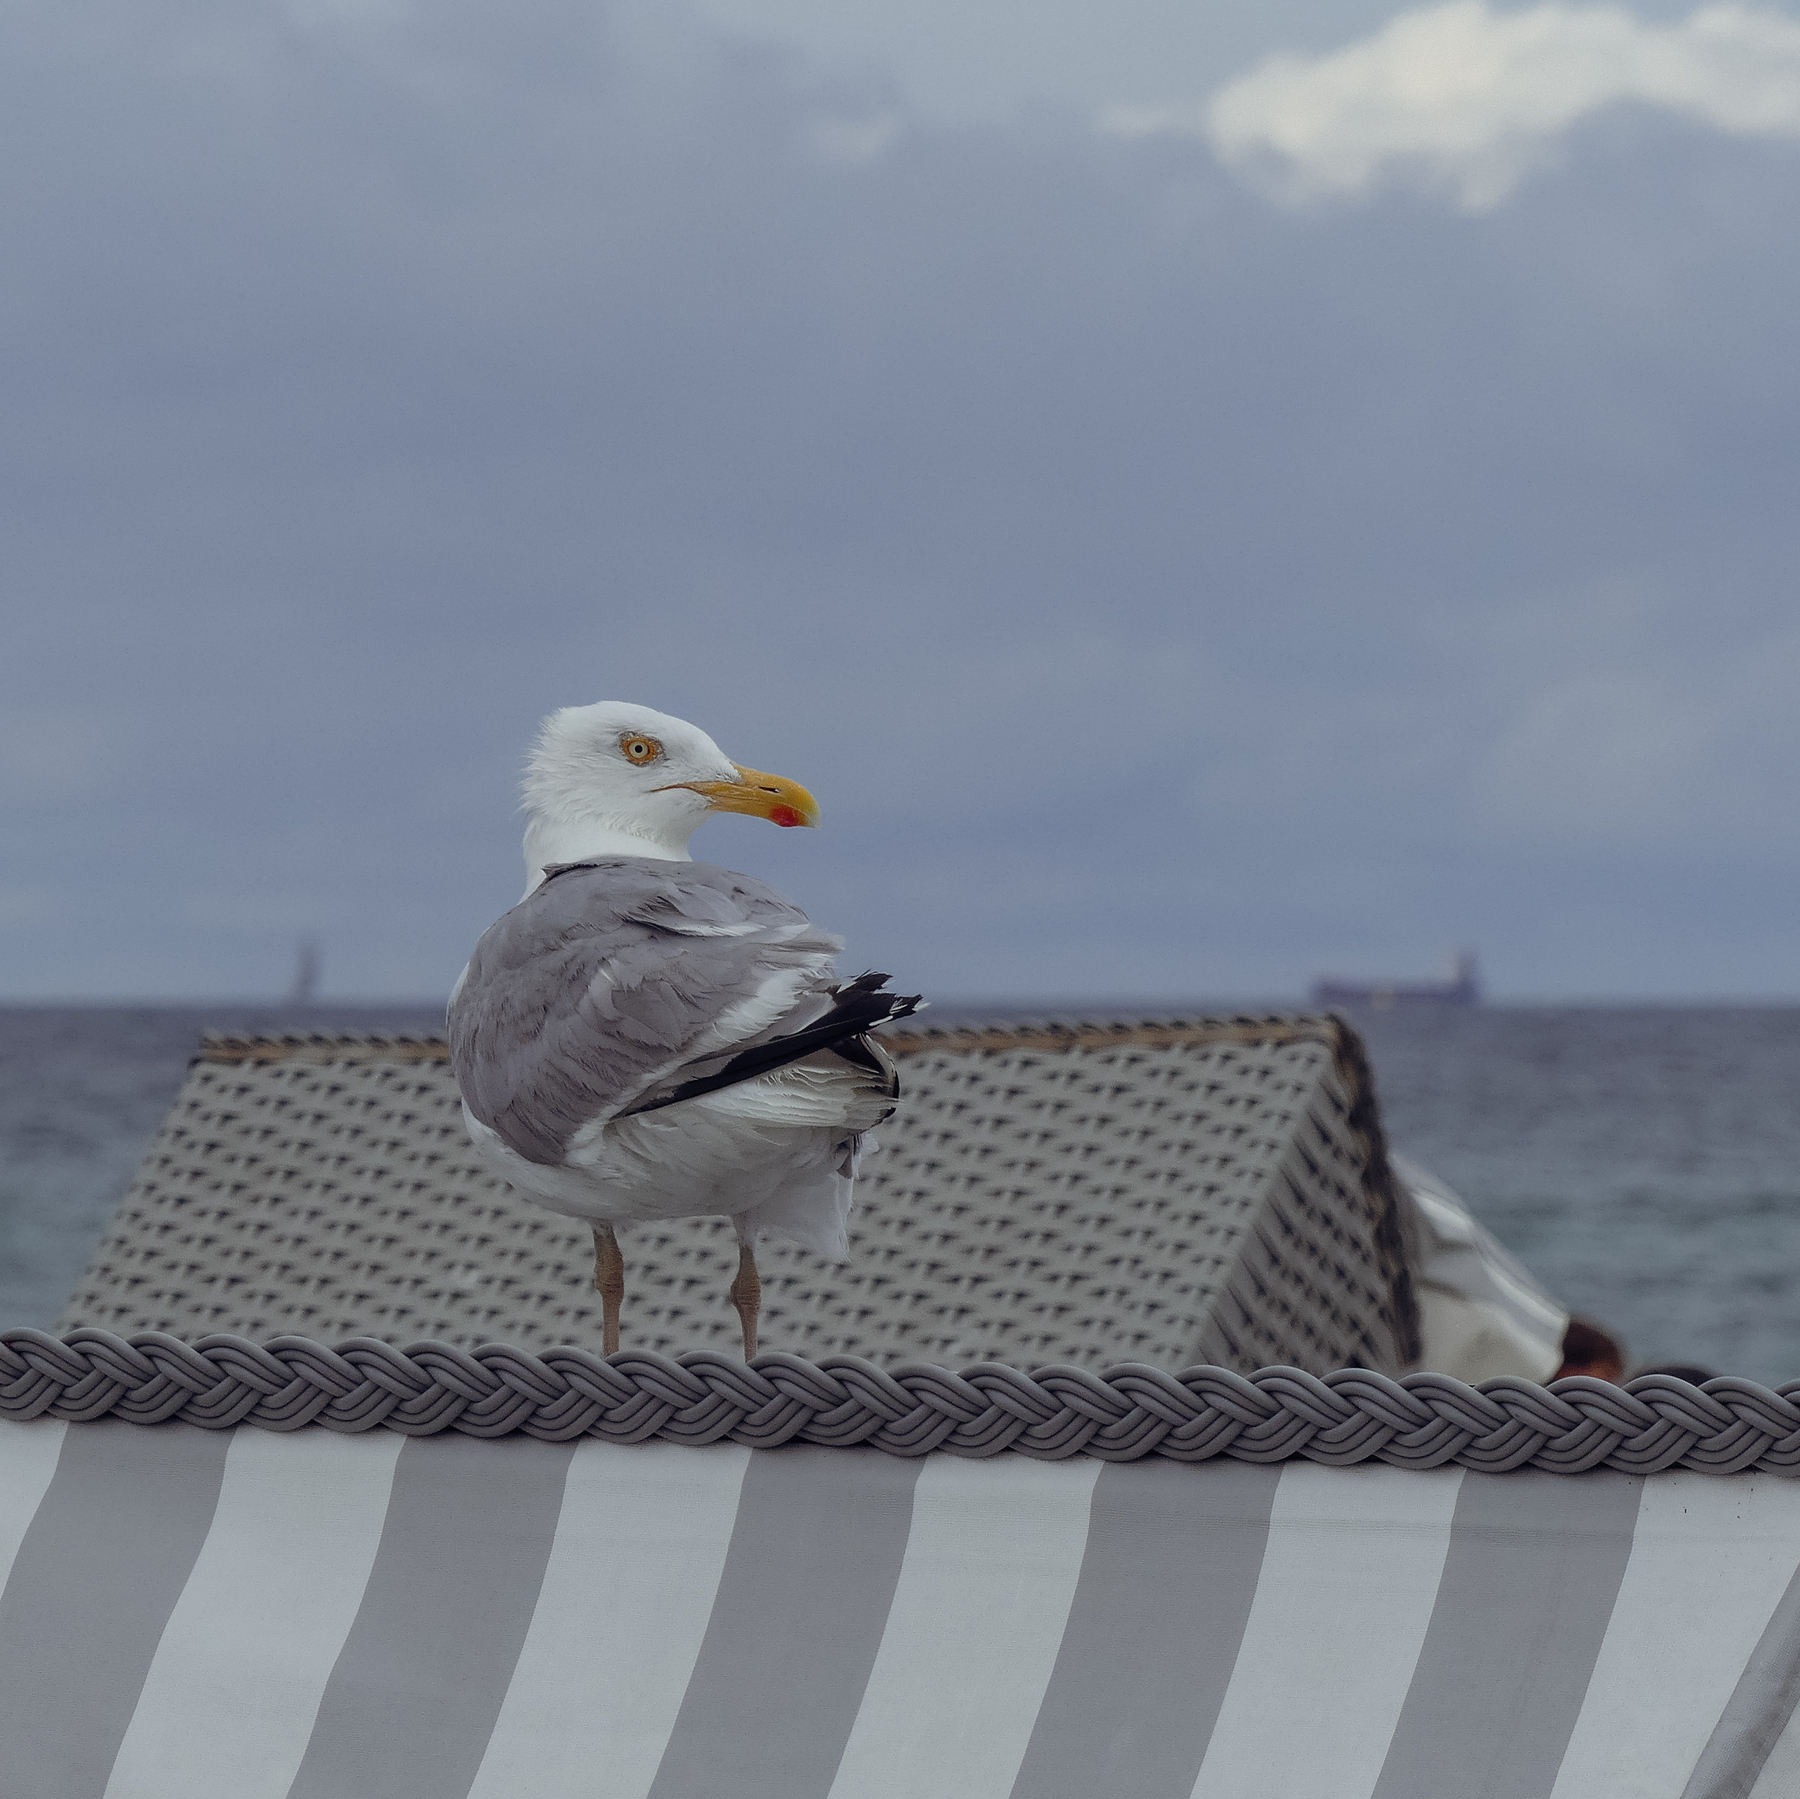 An angry looking seagull on the beach at Warnemünde